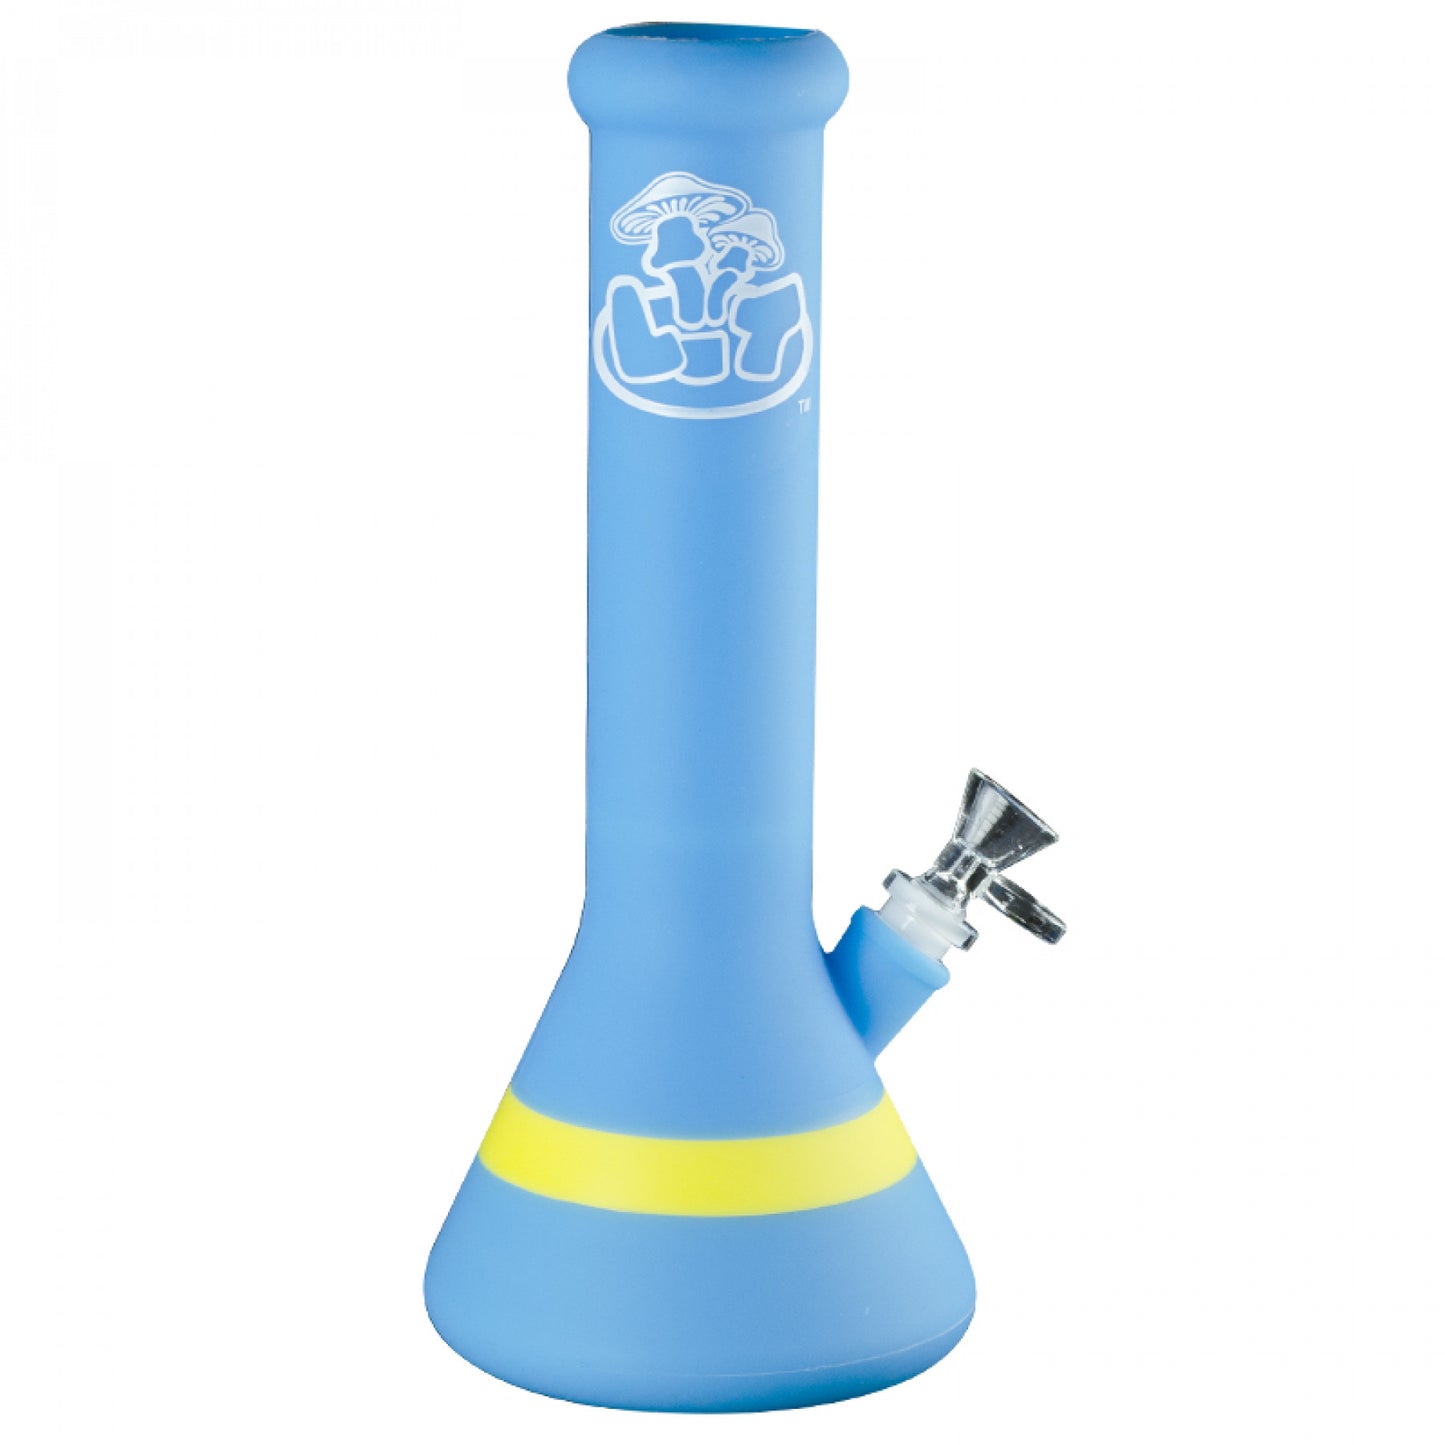 light blue bong with yellow stripe at the bottom, glass bowl and Lit logo.